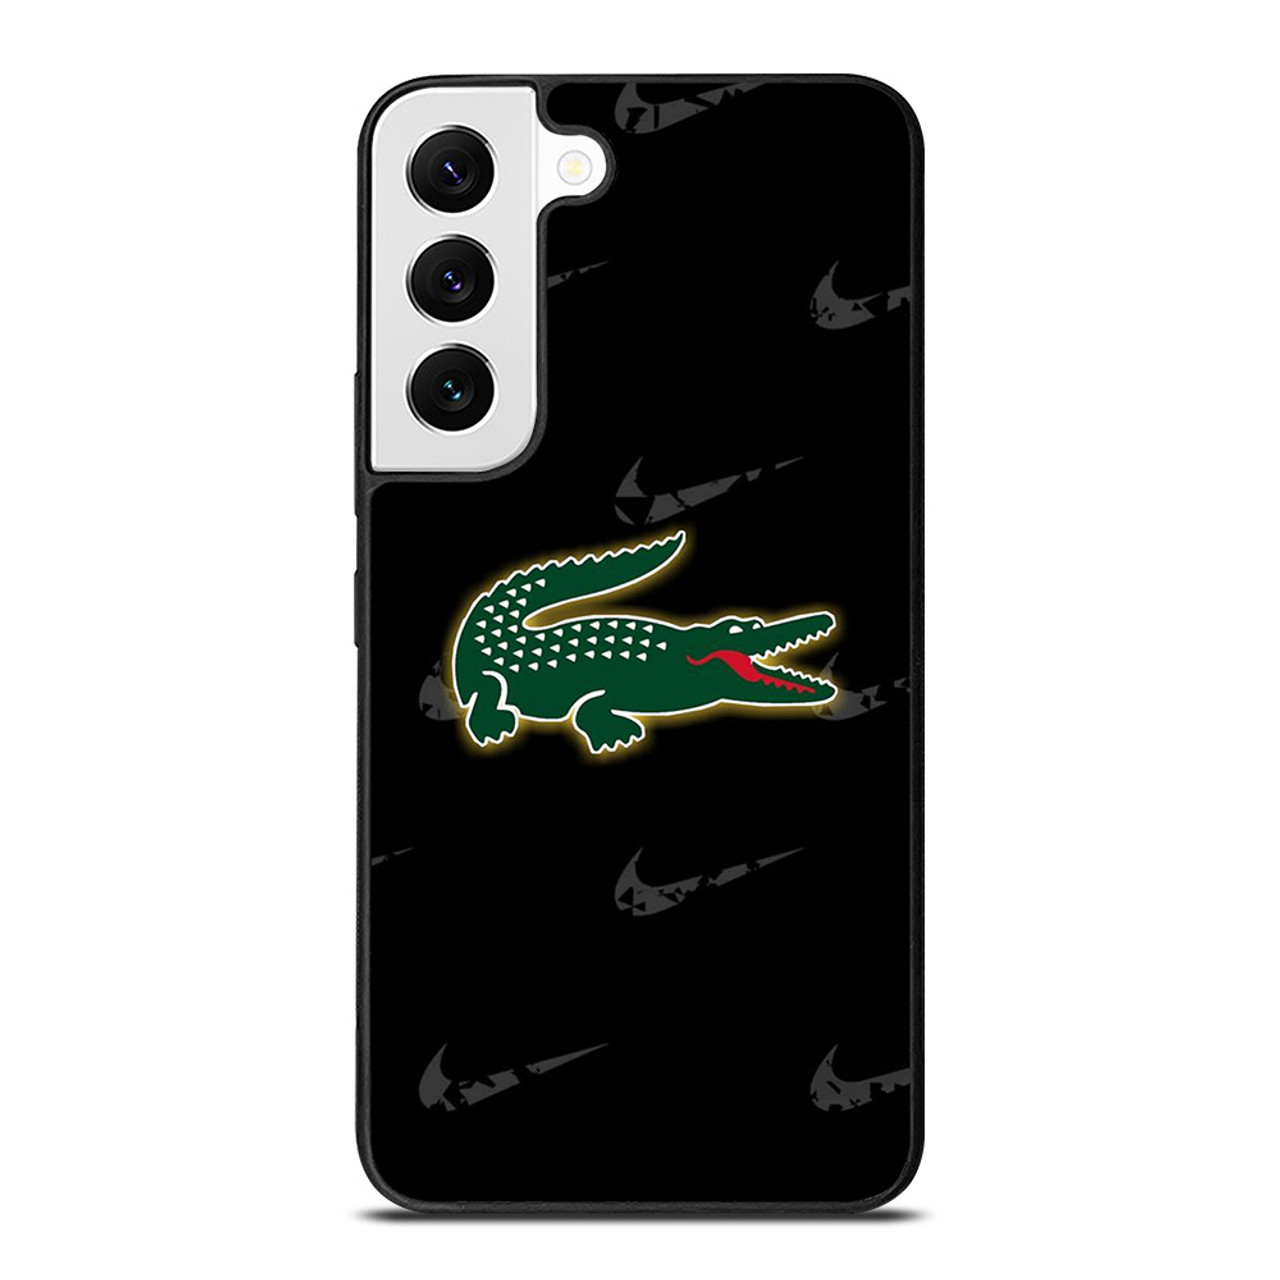 LACOSTE X NIKE PATTERN Samsung Galaxy S22 Case Cover